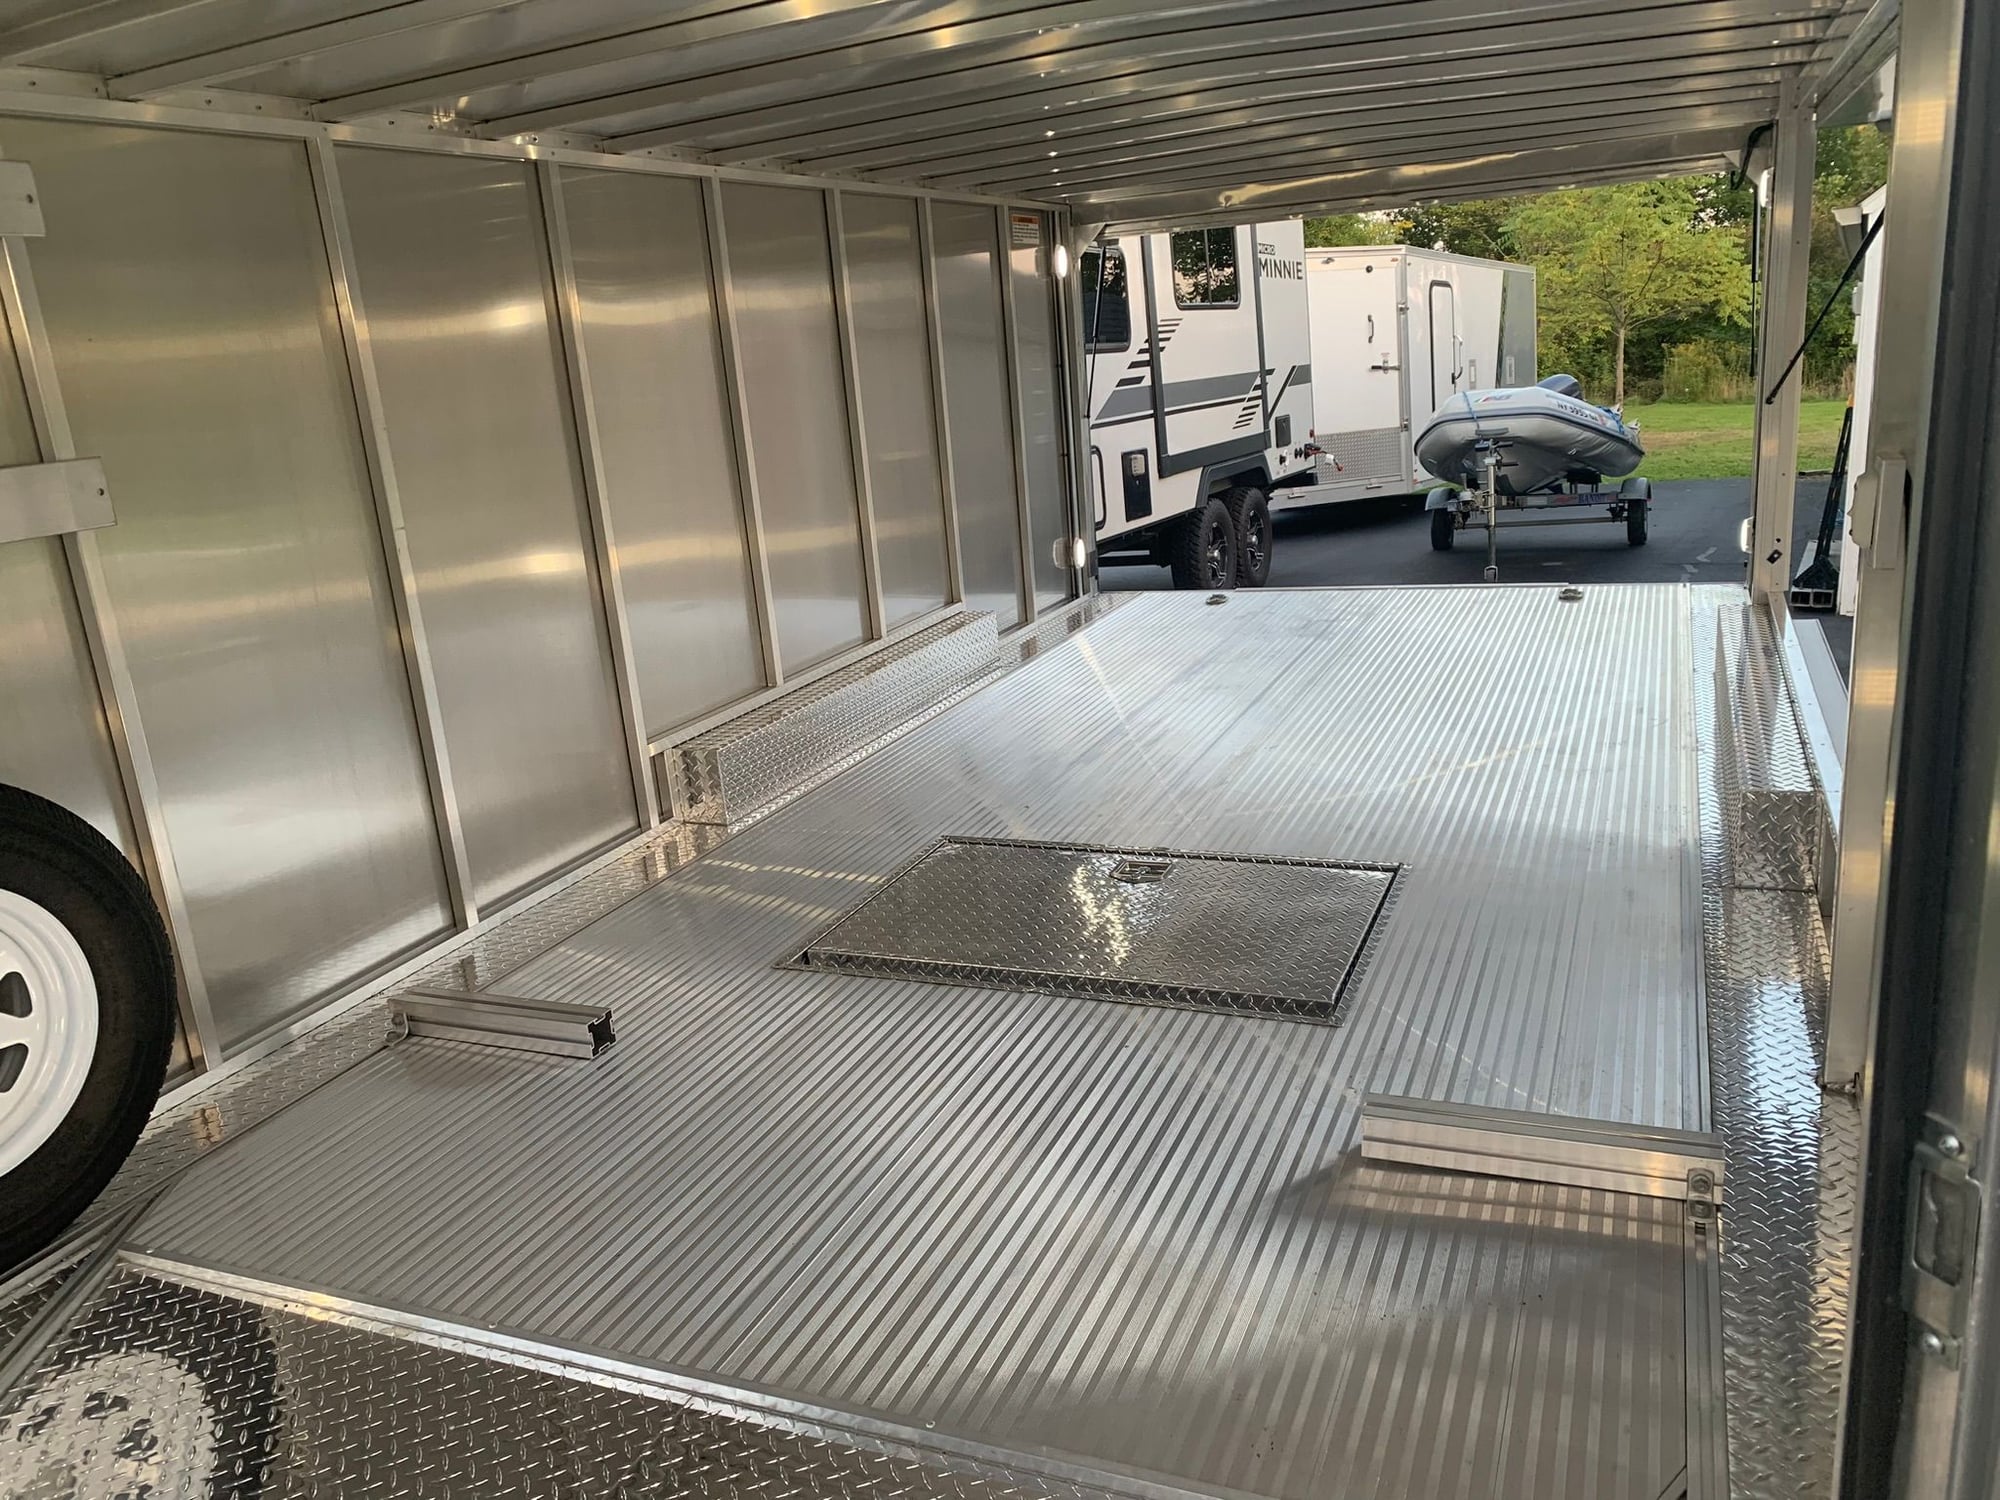 Miscellaneous - Trailex Sports Car Trailer model 84180T 2015 like new condition. - Used - Clayton, NY 13624, United States